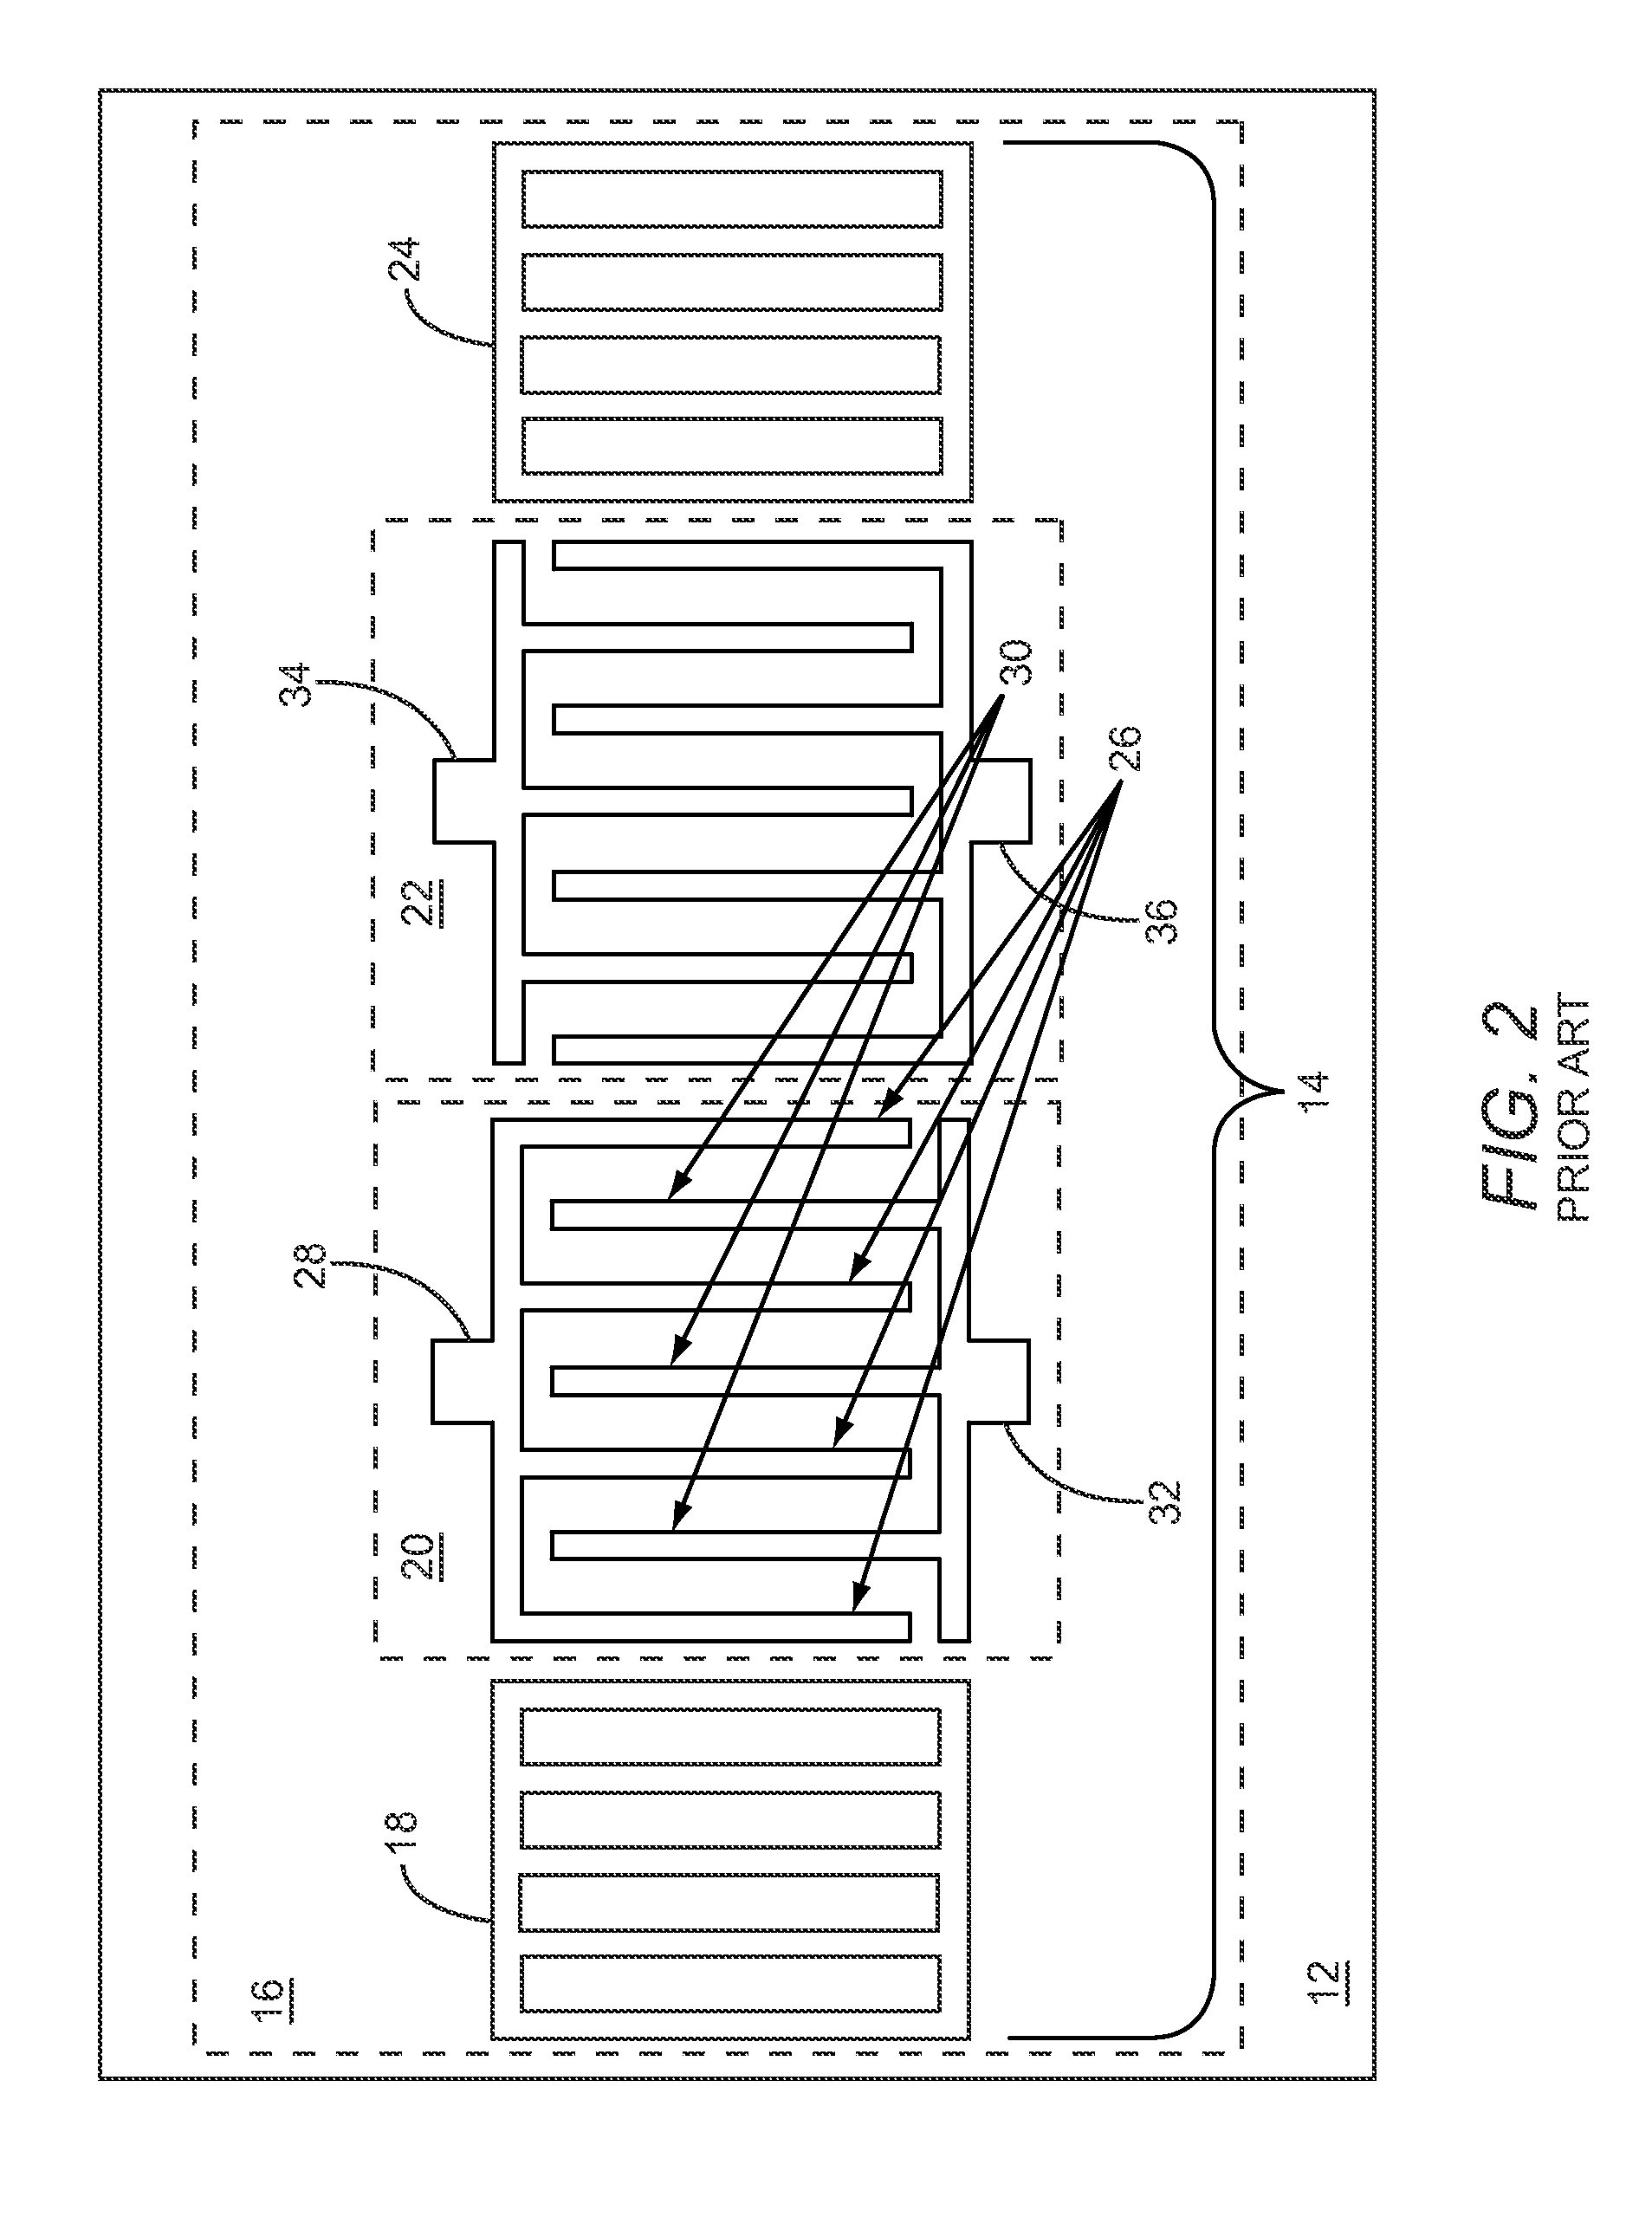 Two-track surface acoustic wave device with interconnecting grating